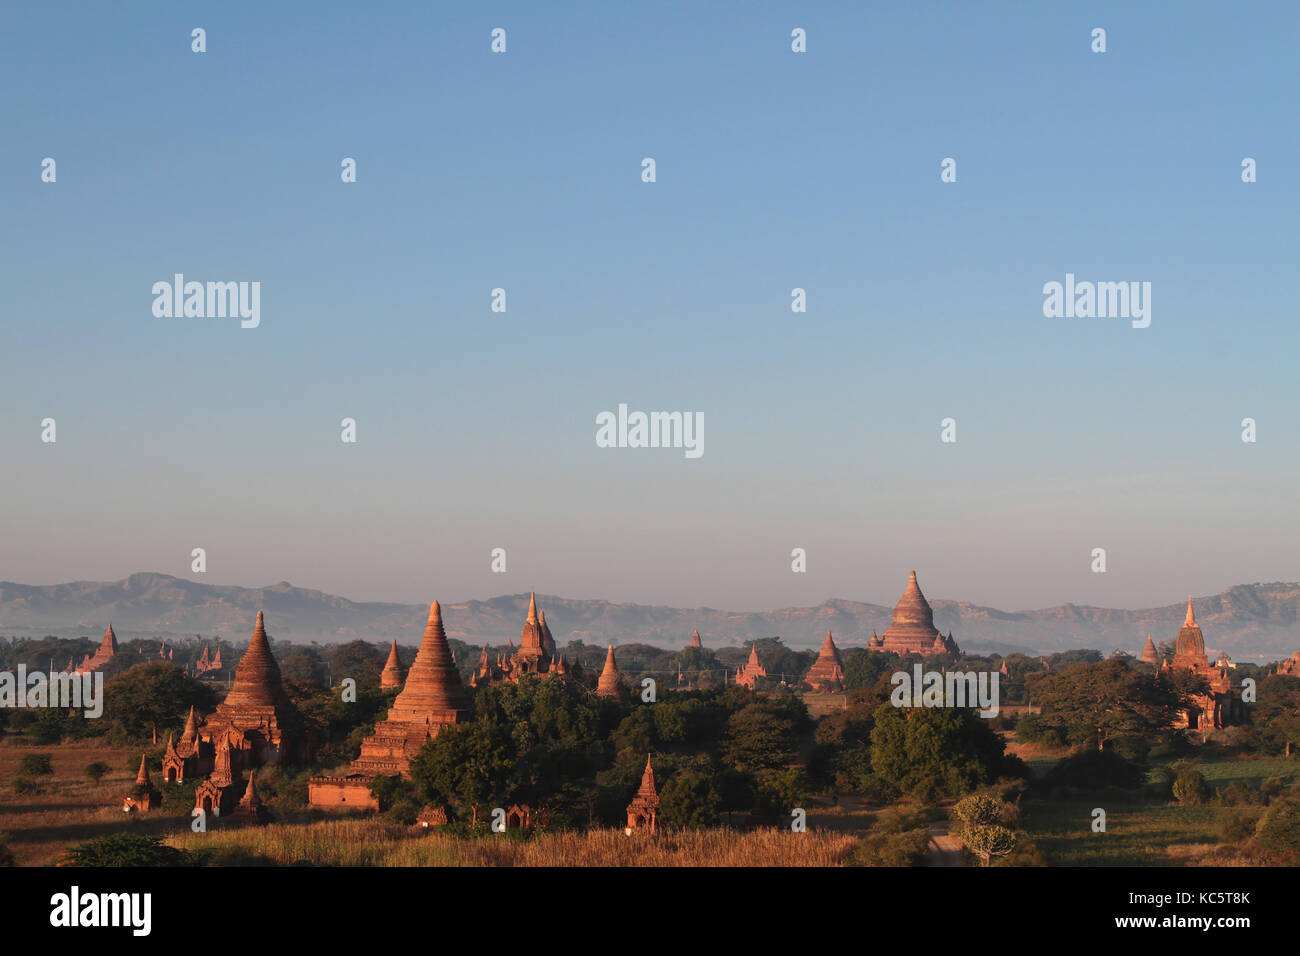 BAGAN, MYANMAR, December 9, 2014 : Young farmer in Bagan countryside. Bagan Archaeological Zone is a main draw for the country's tourism industry and  Stock Photo